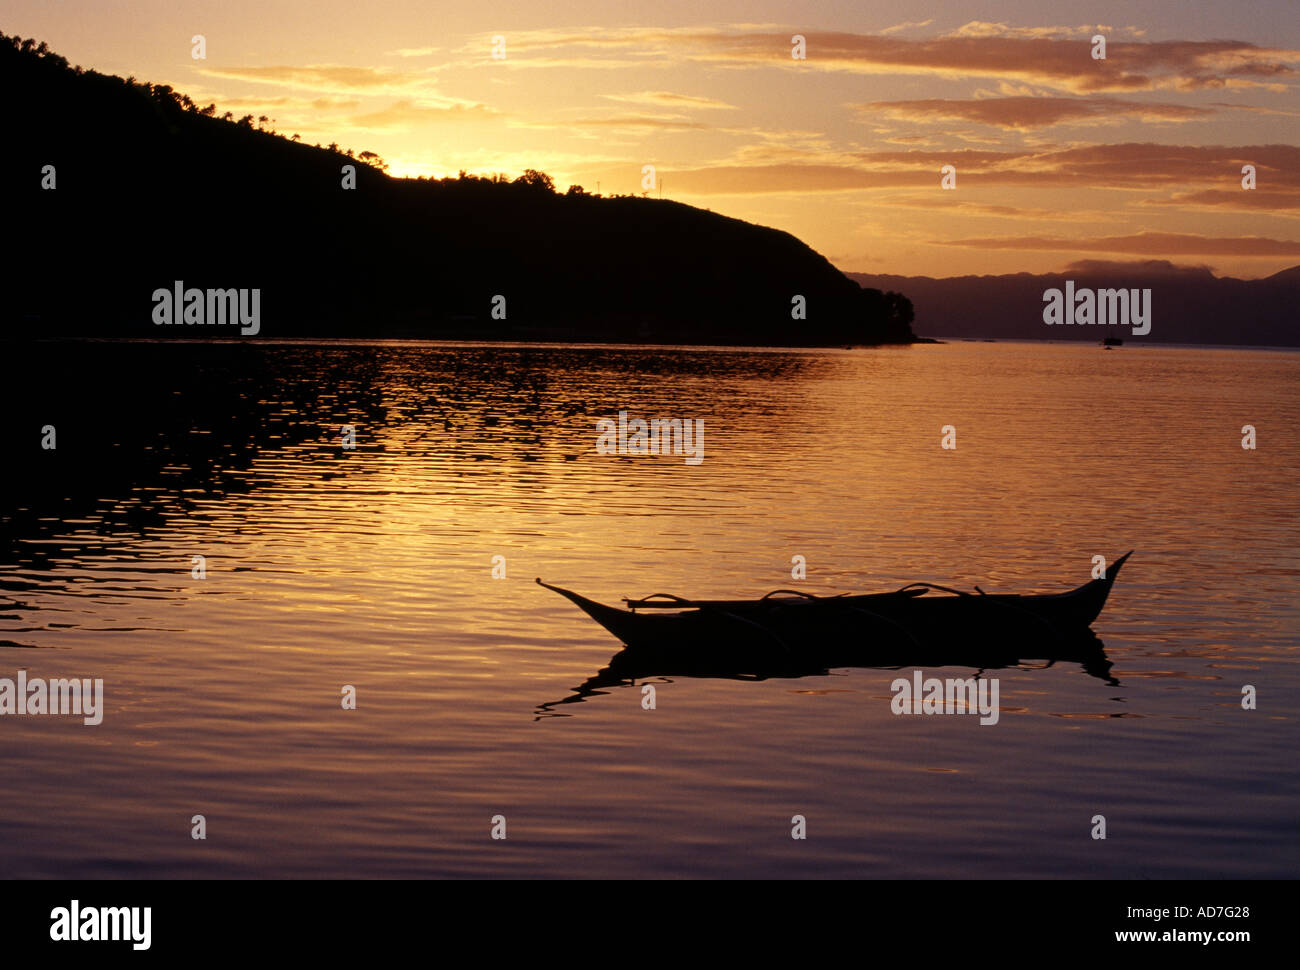 Boat was floating on a bay that was reflecting a beautiful sunset in Romblon, Philippines. Stock Photo